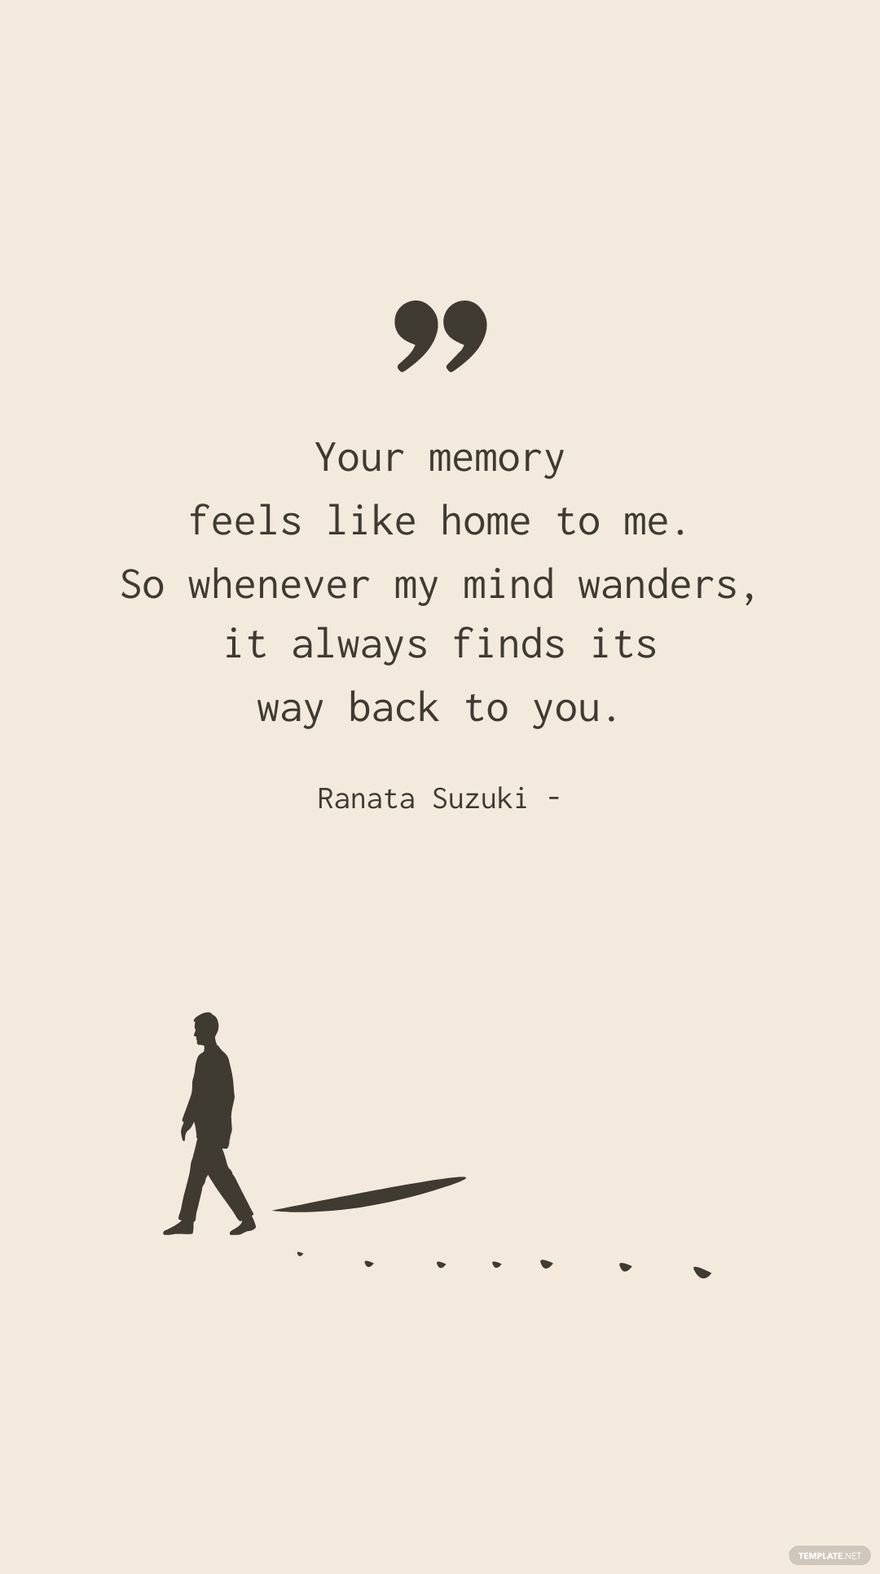 Free Ranata Suzuki - Your memory feels like home to me. So whenever my mind wanders, it always finds its way back to you.